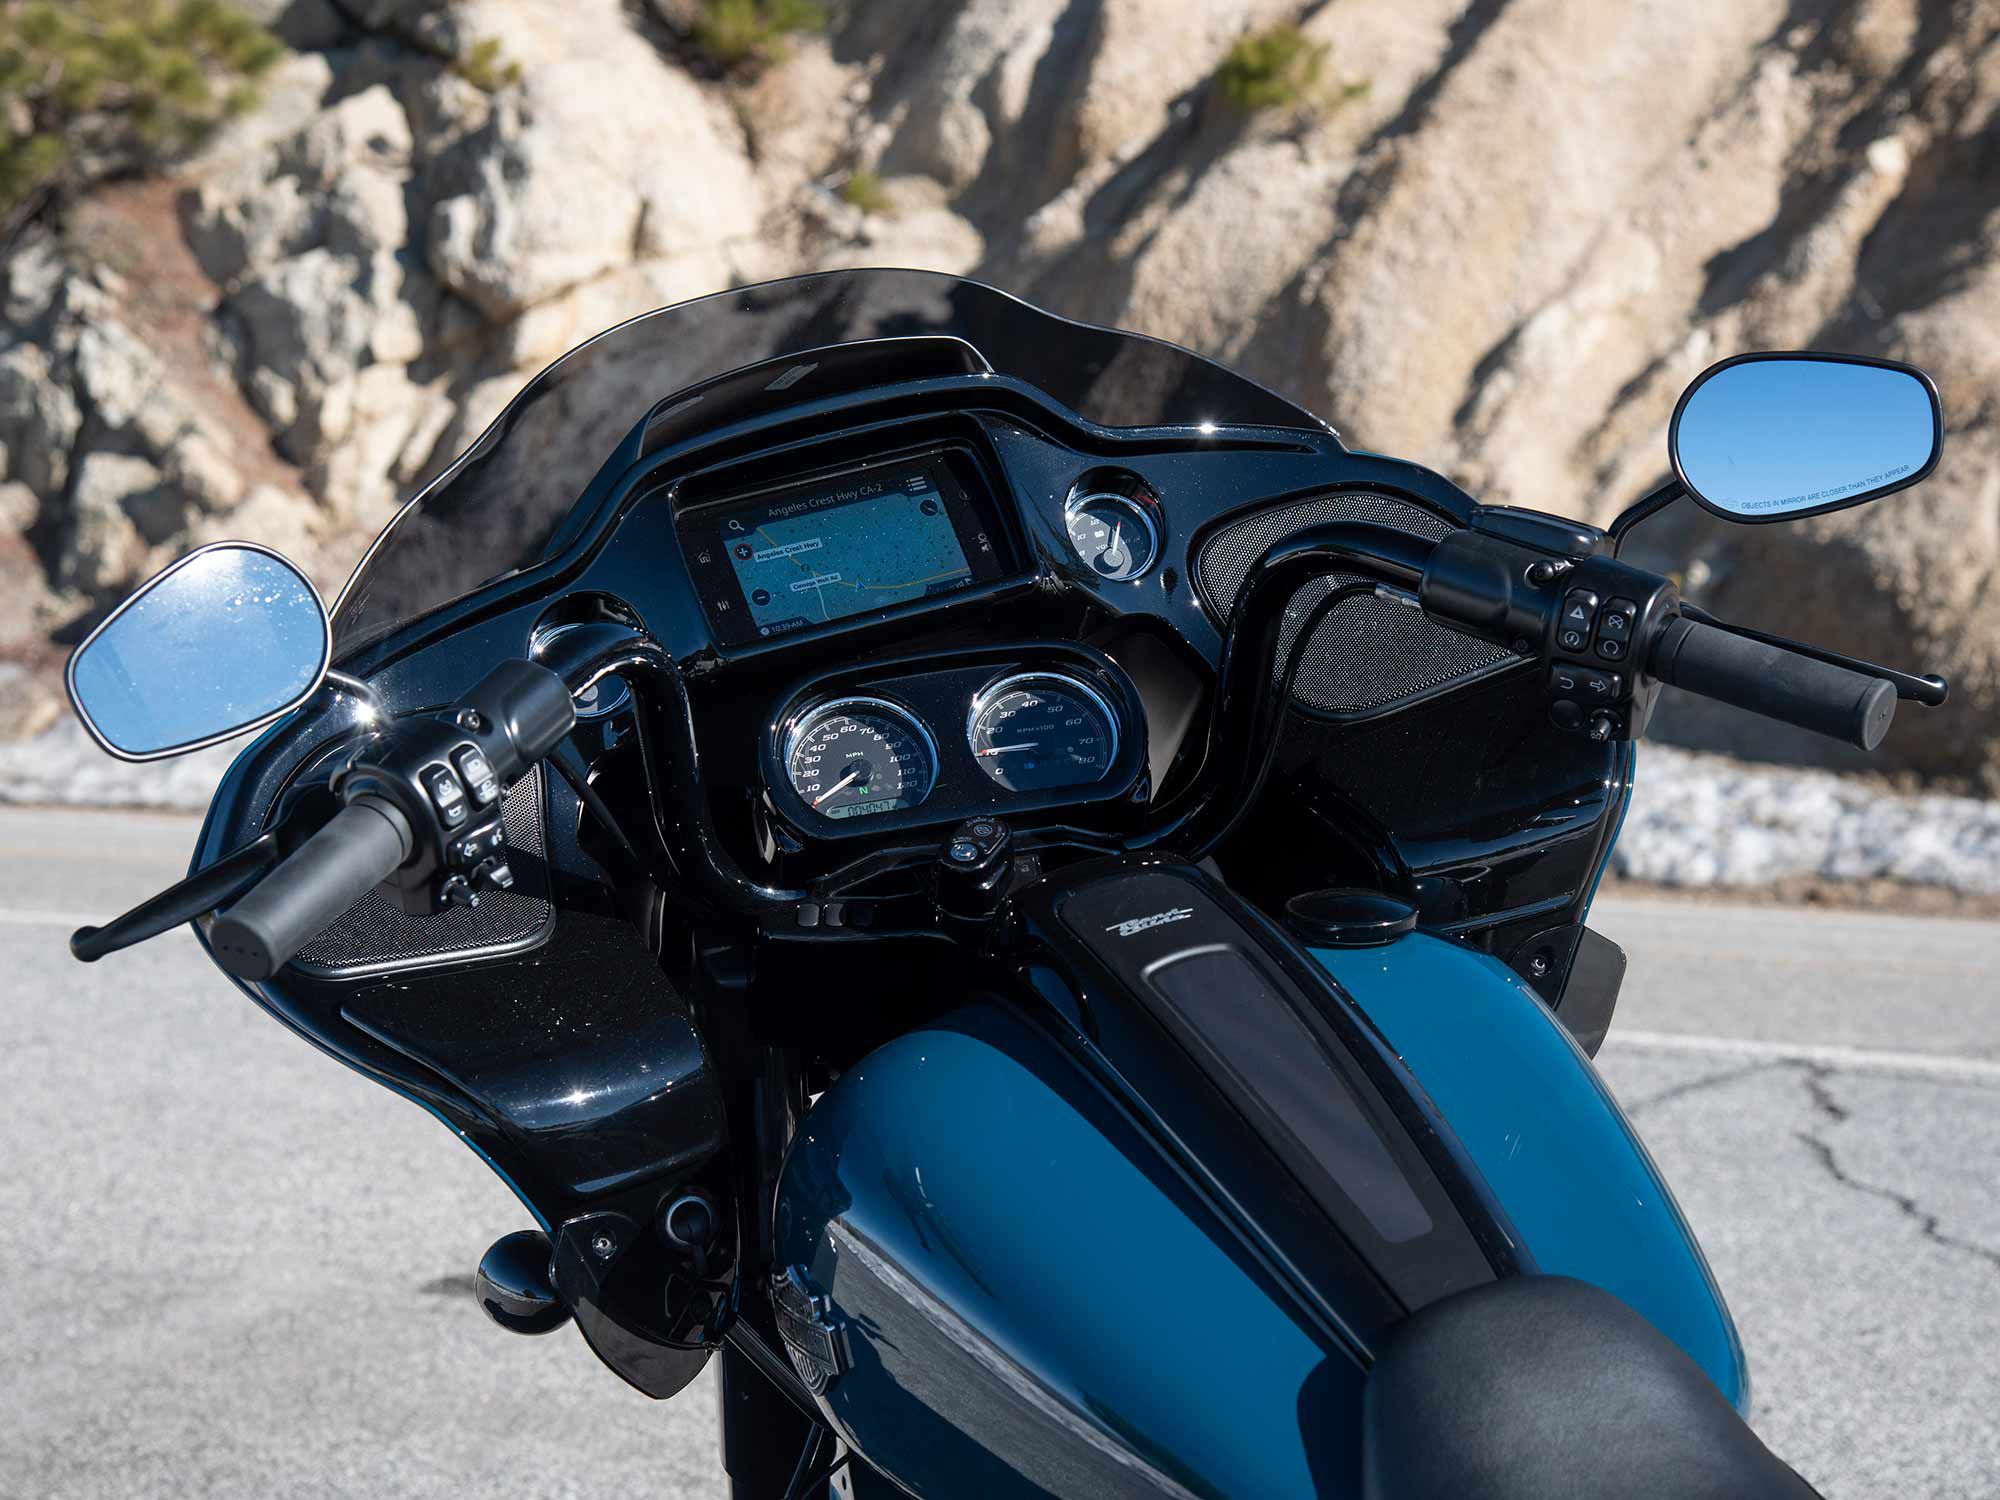 The Road Glide Special’s cockpit combines old and new, with analog gauges and a 6.5-inch TFT touchscreen peacefully coexisting alongside Harley’s familiar switch gear.